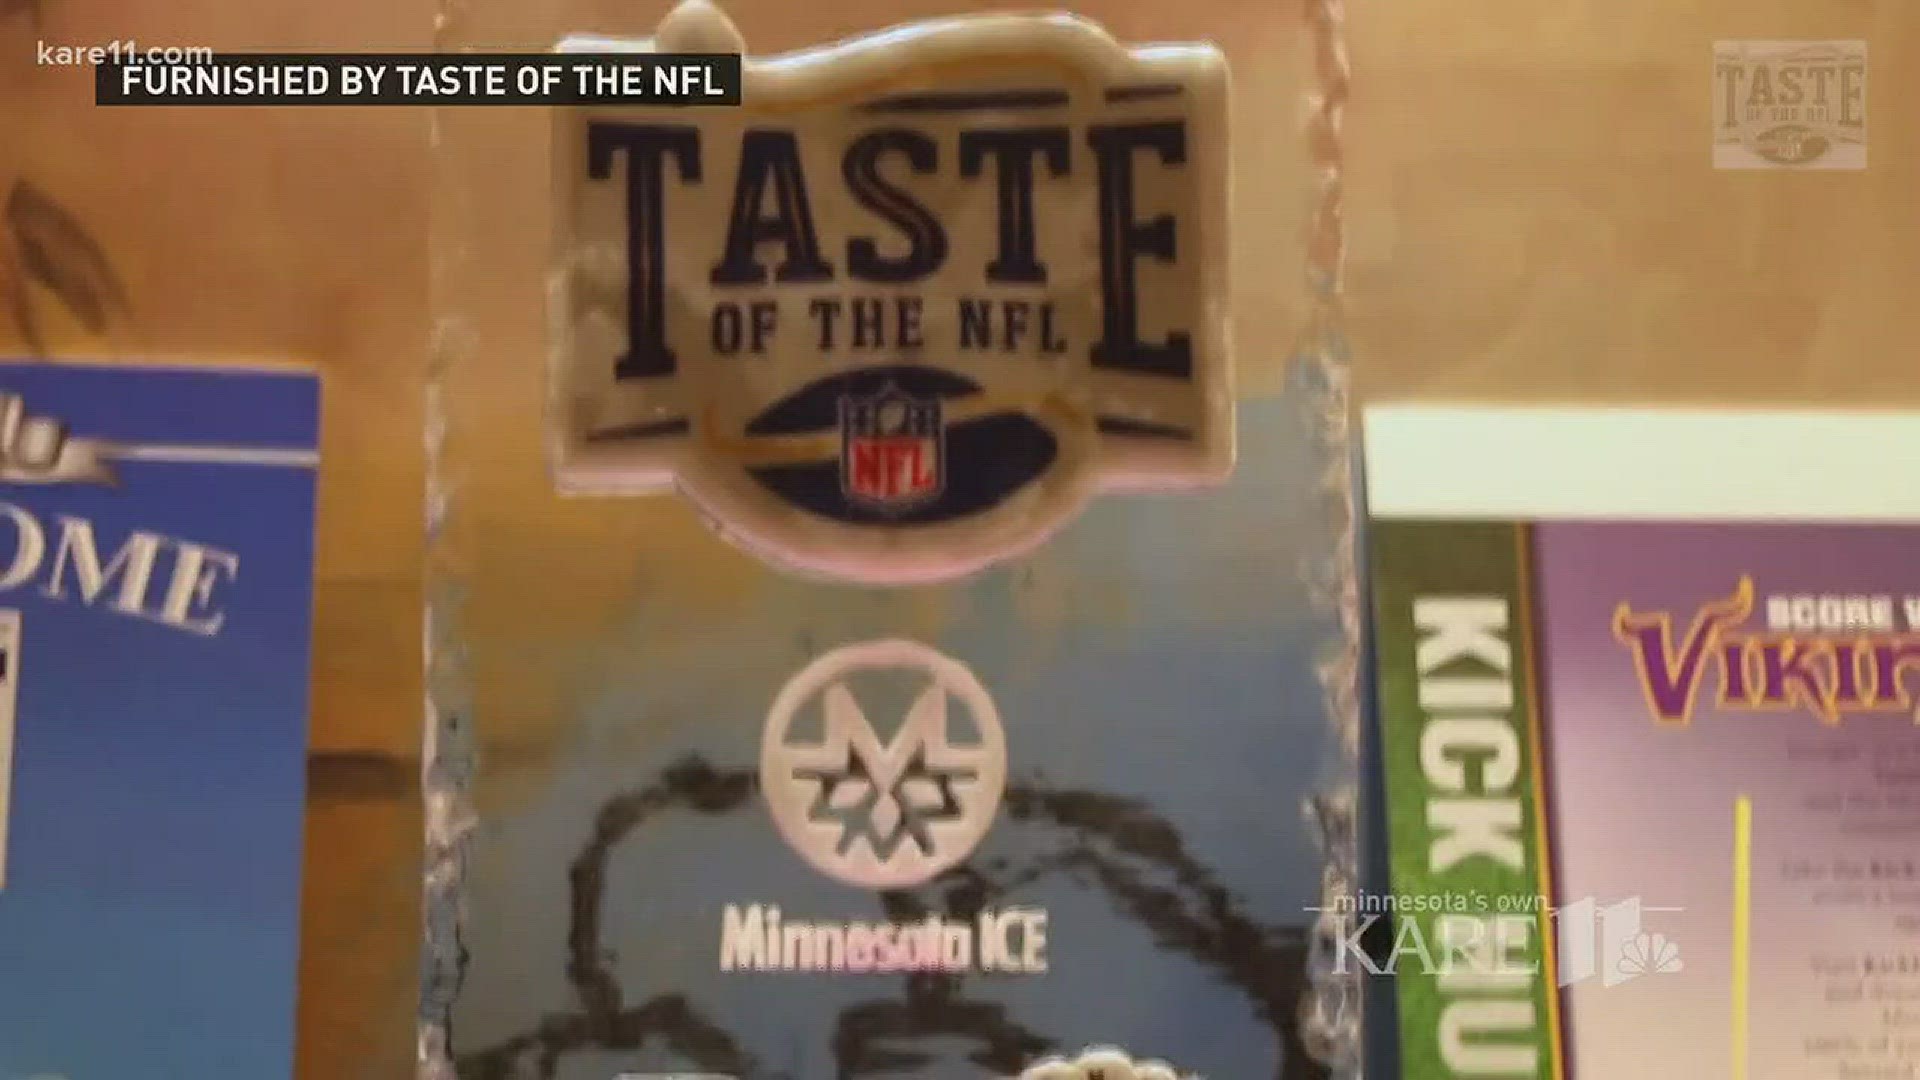 Taste of the NFL is returning home to Minneapolis for Super Bowl 52. http://kare11.tv/2BCW9Ej